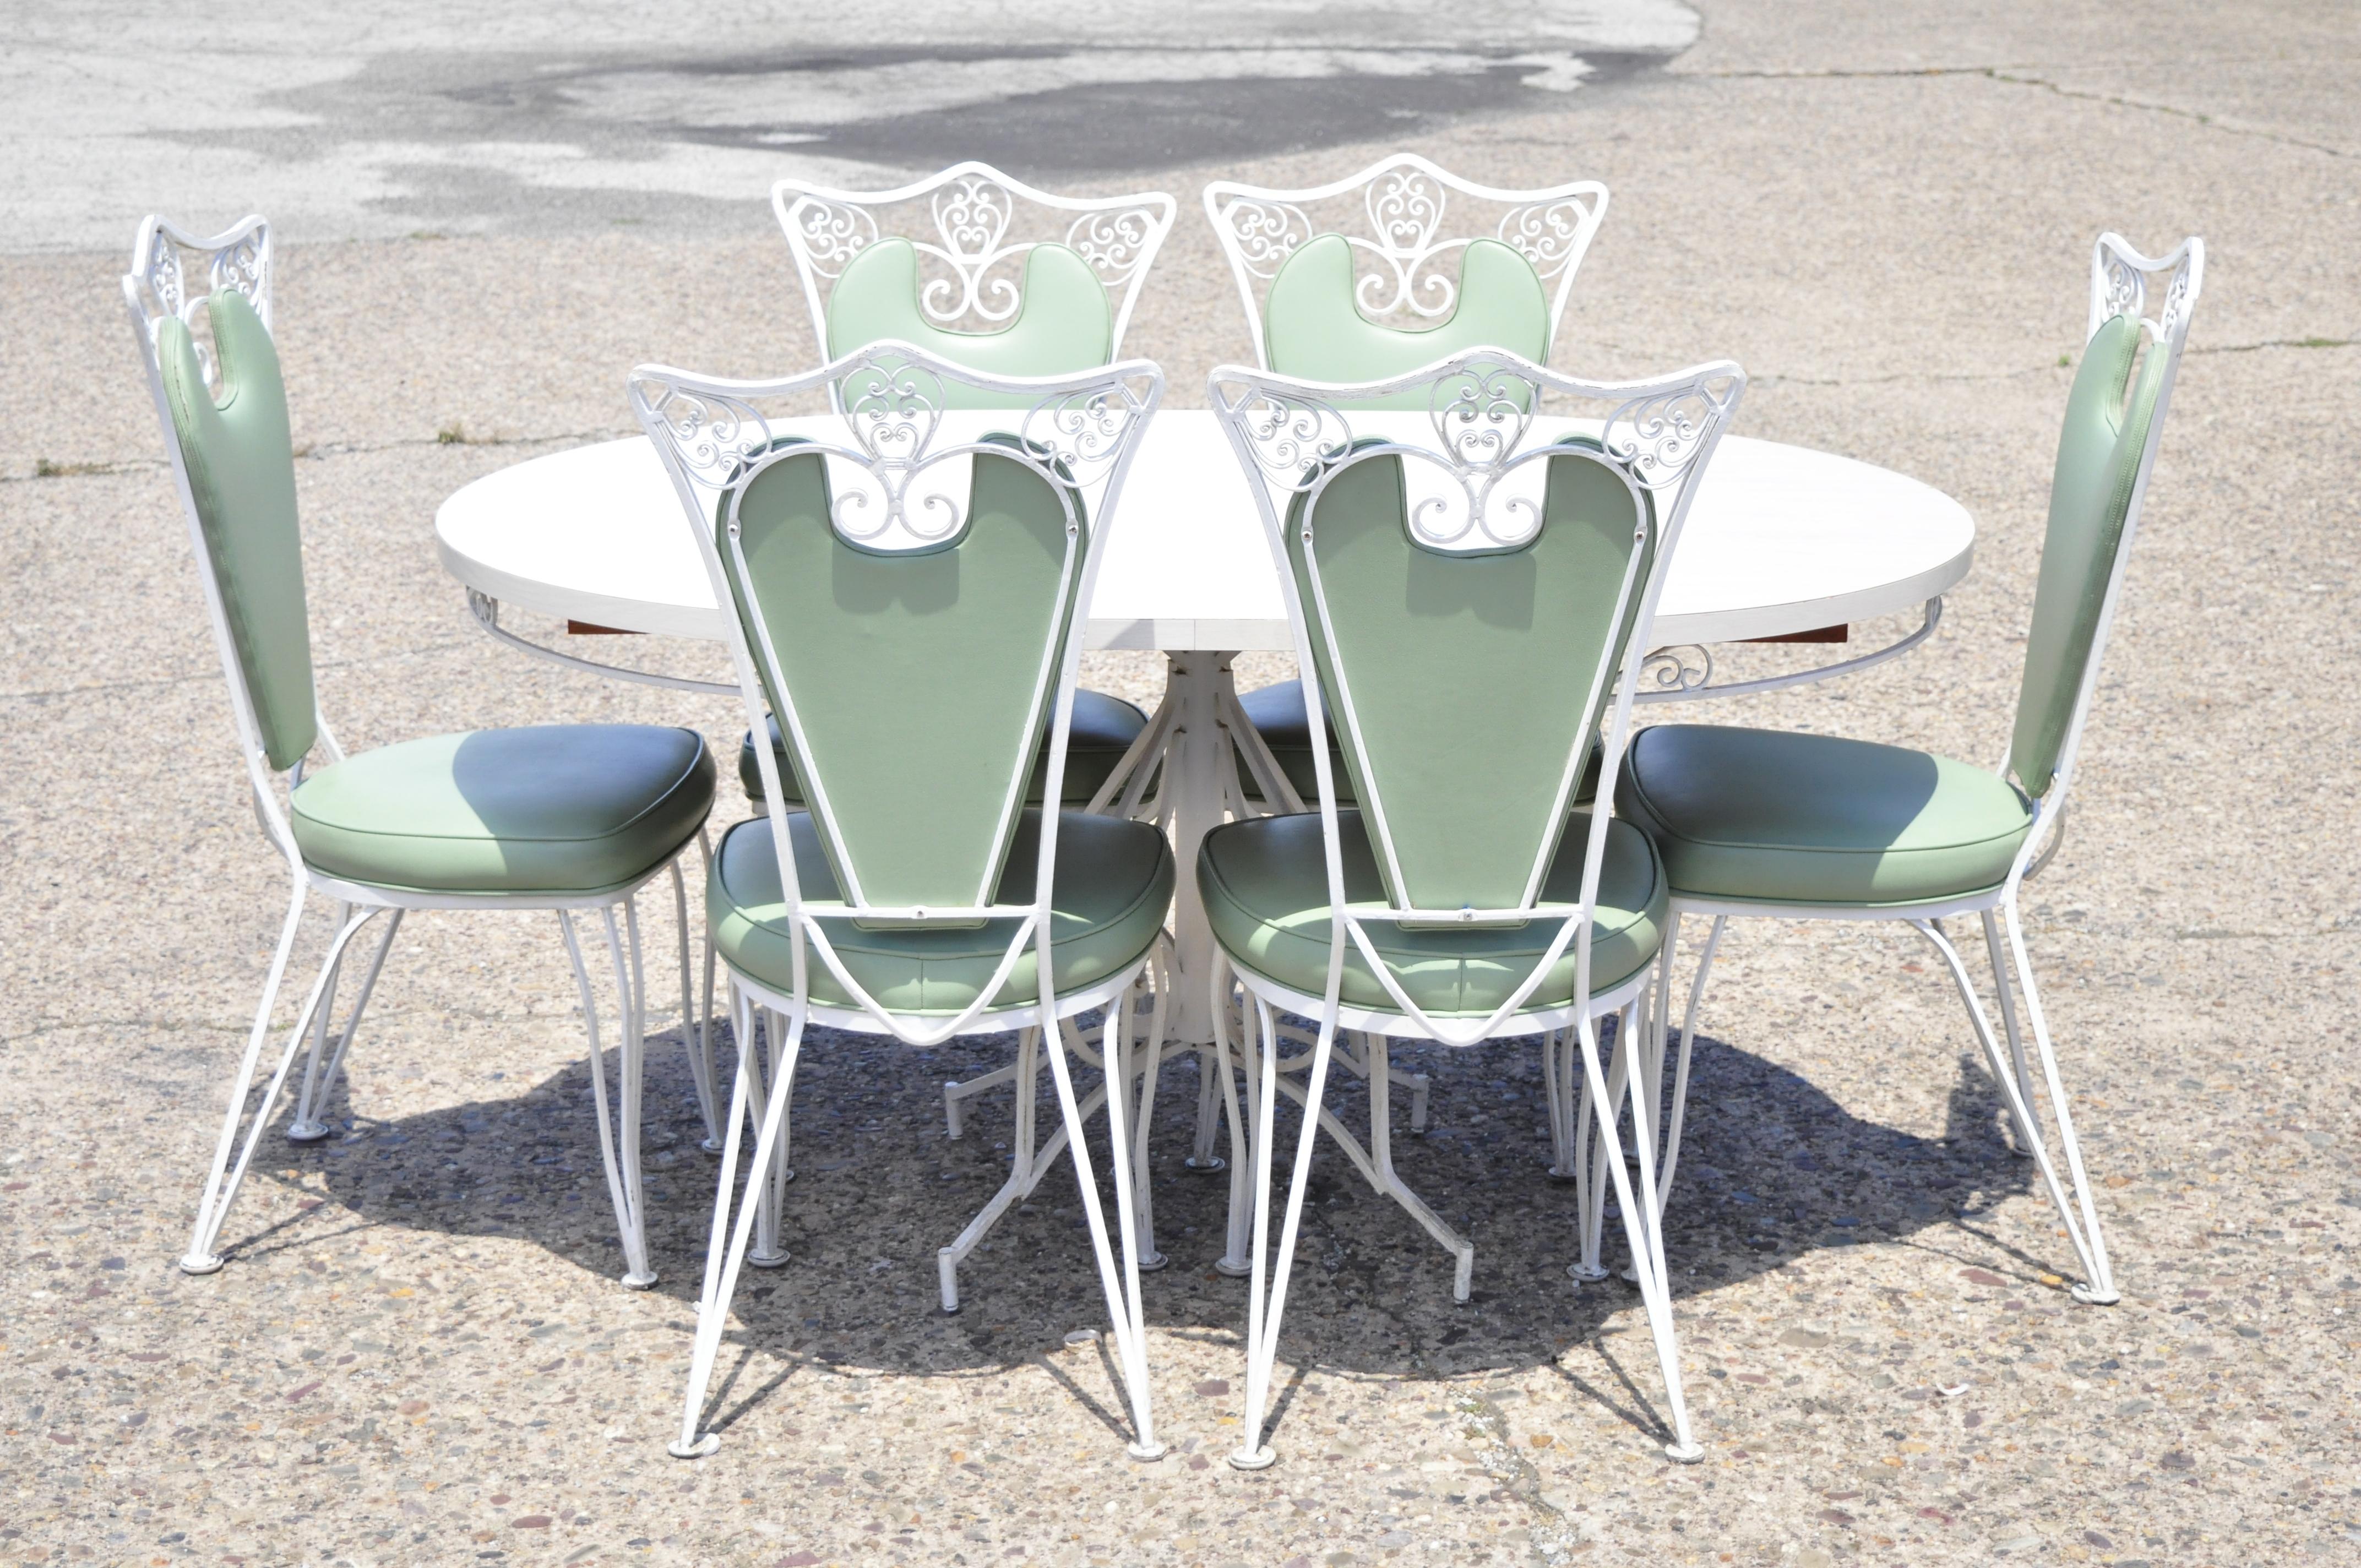 Vintage Regency Wrought Iron Dining Set Oval Table 6 Chairs Mint Green, 7pc Set 4